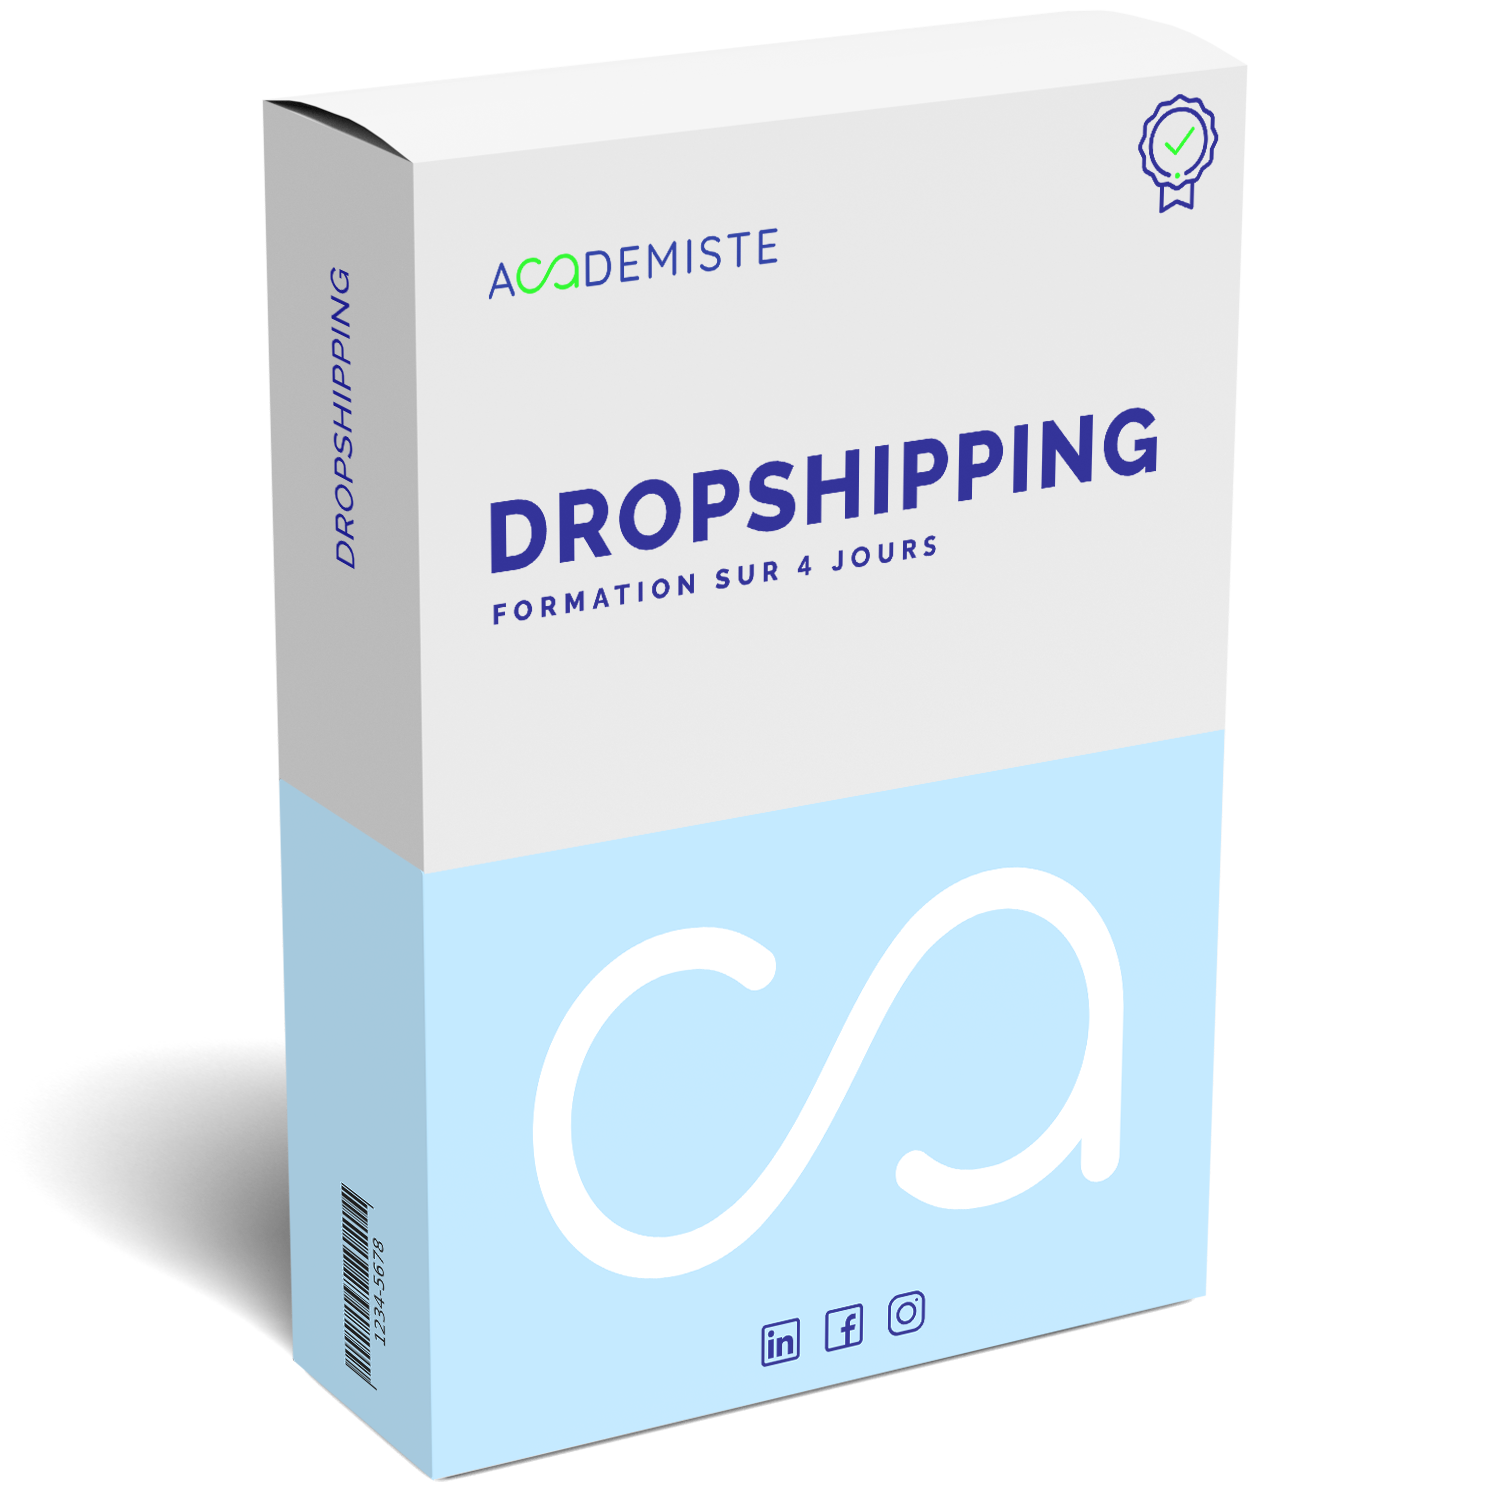 Ardoise LEARNING, Grossiste Dropshipping